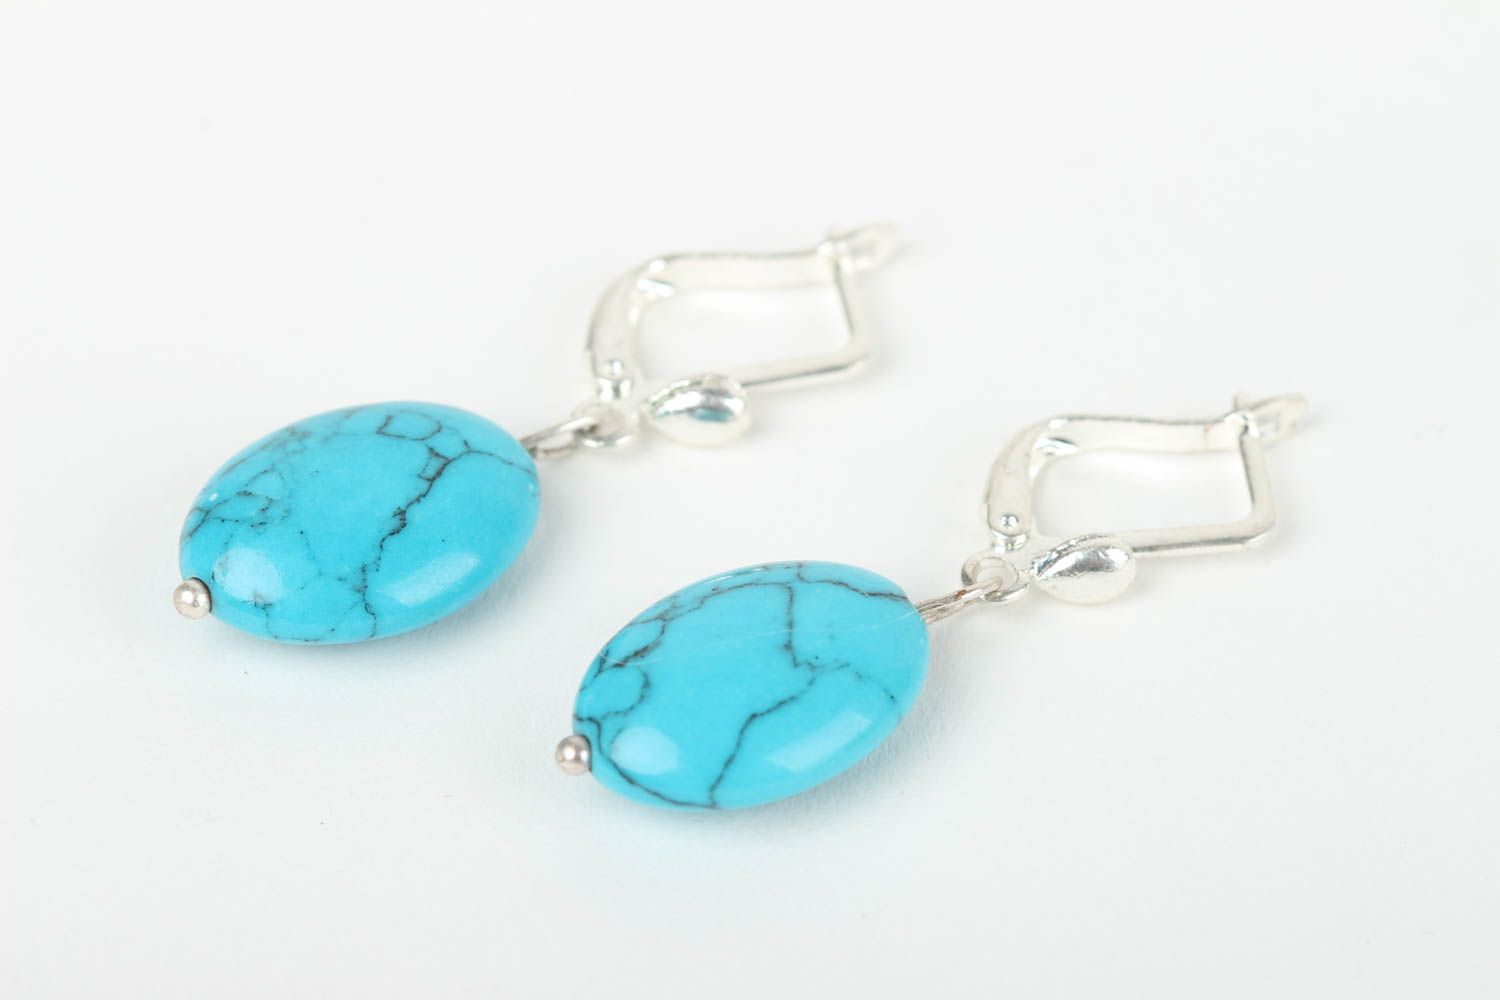 Turquoise earrings handmade earrings with natural stones fashion jewelry photo 2